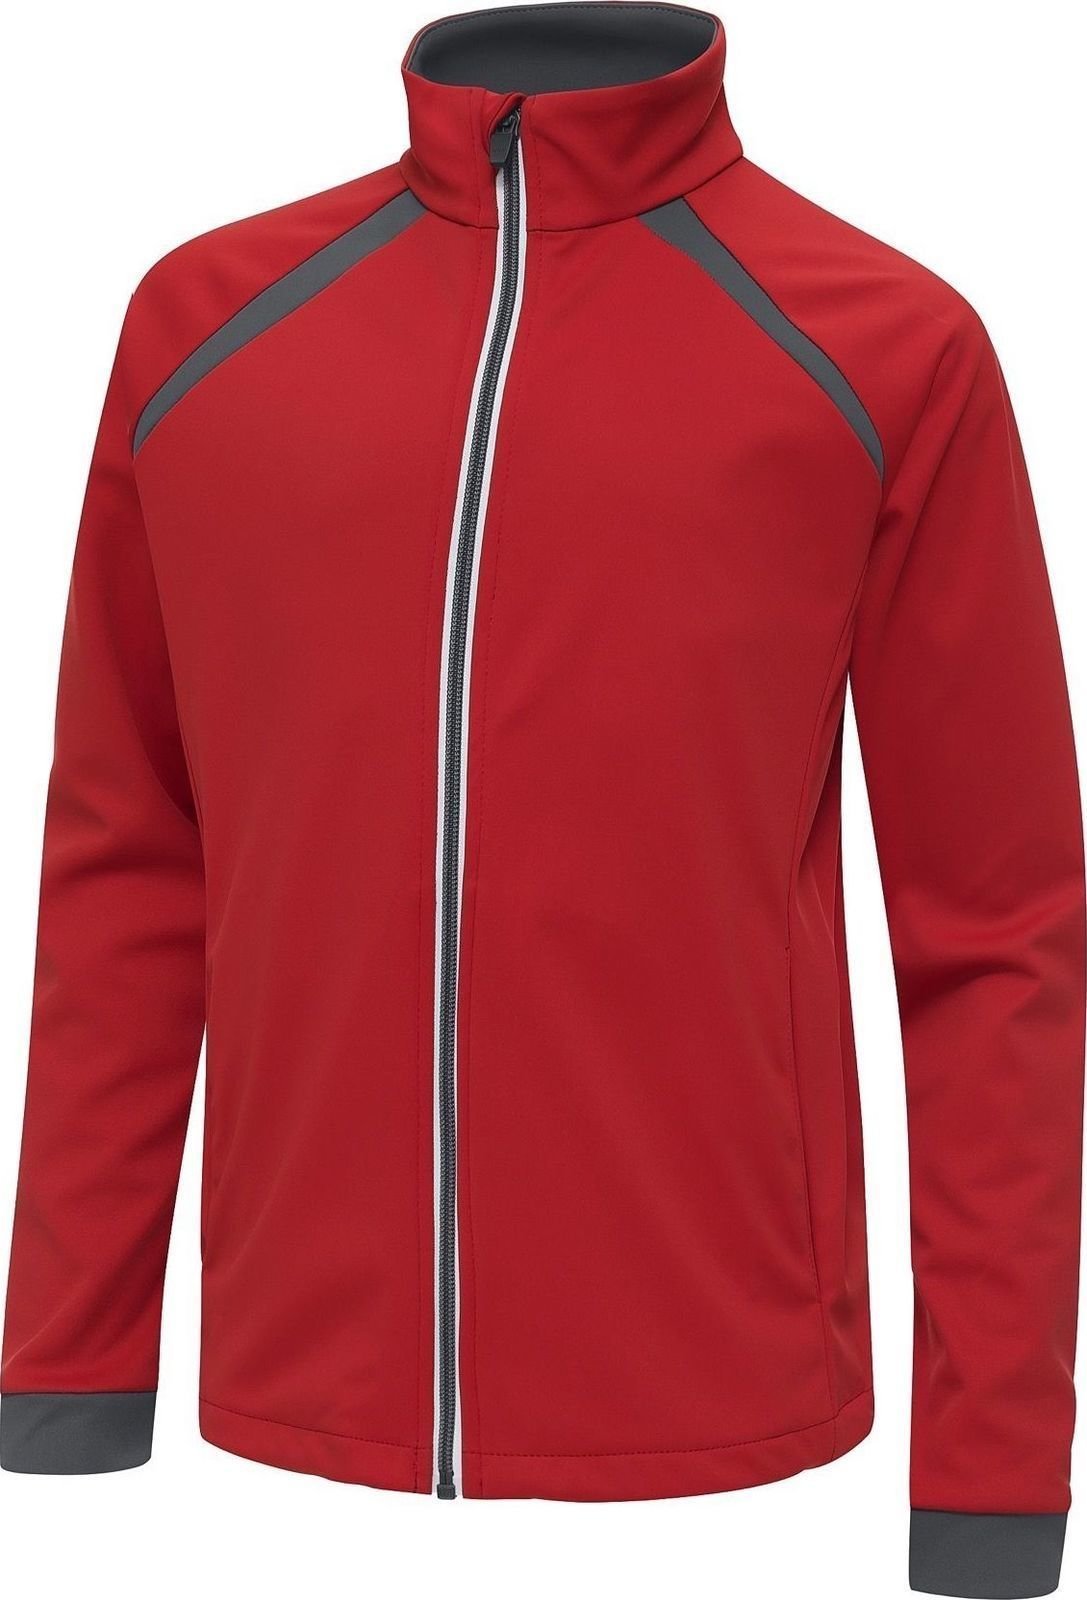 Veste imperméable Galvin Green Rusty Interface-1 Electric Red/Gunmetal L